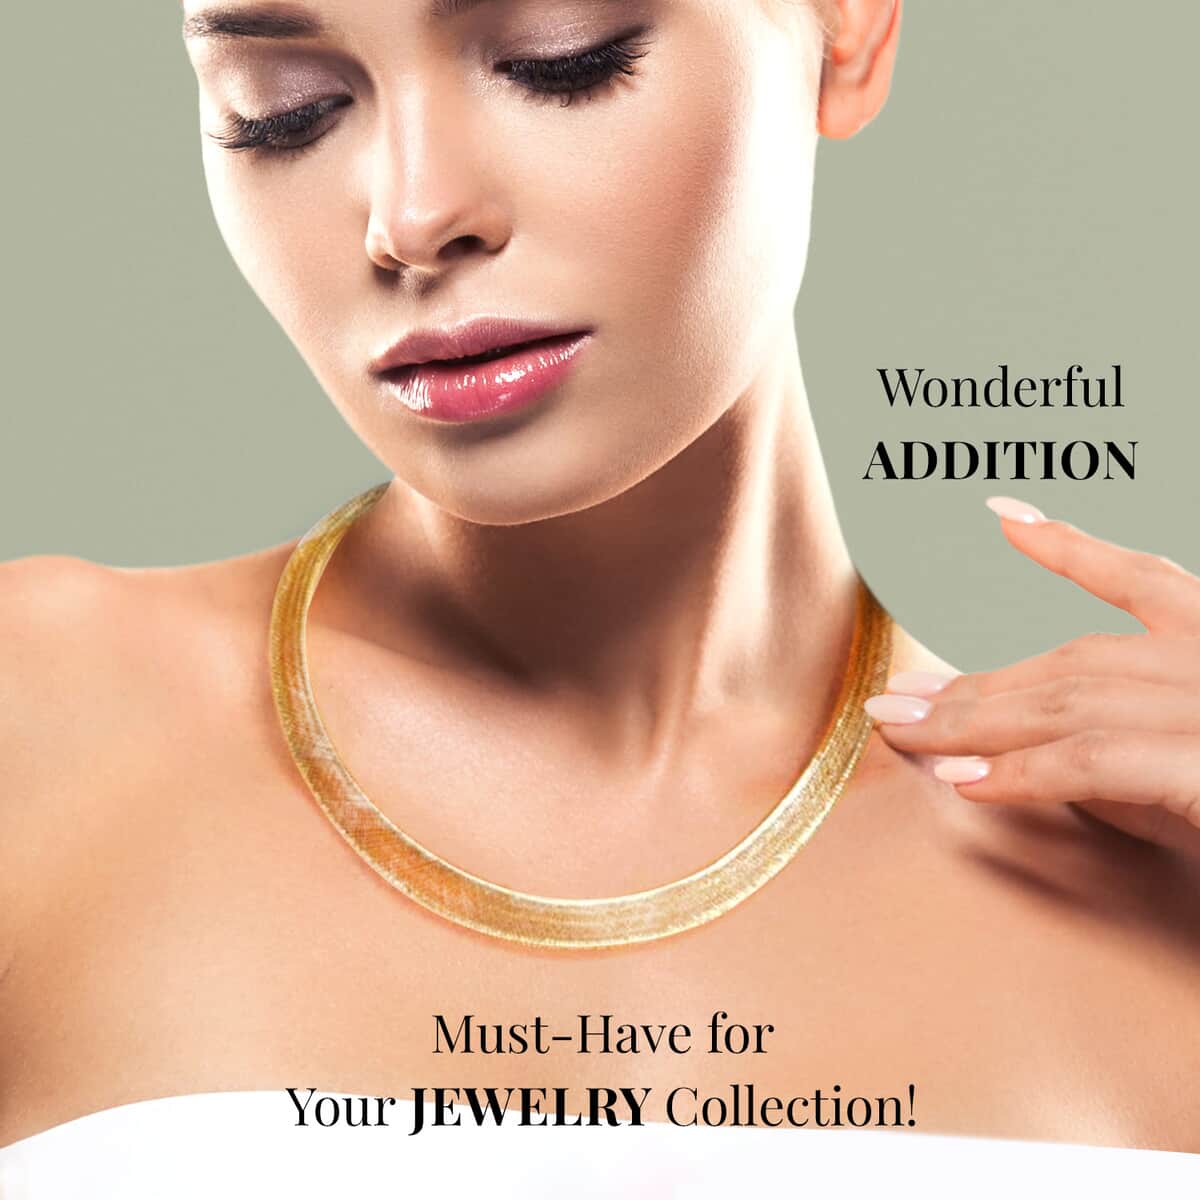 Italian Mesh Necklace 10K Yellow Gold, Gold Necklace, Jewelry Gifts For Her (18-20 Inches) image number 2